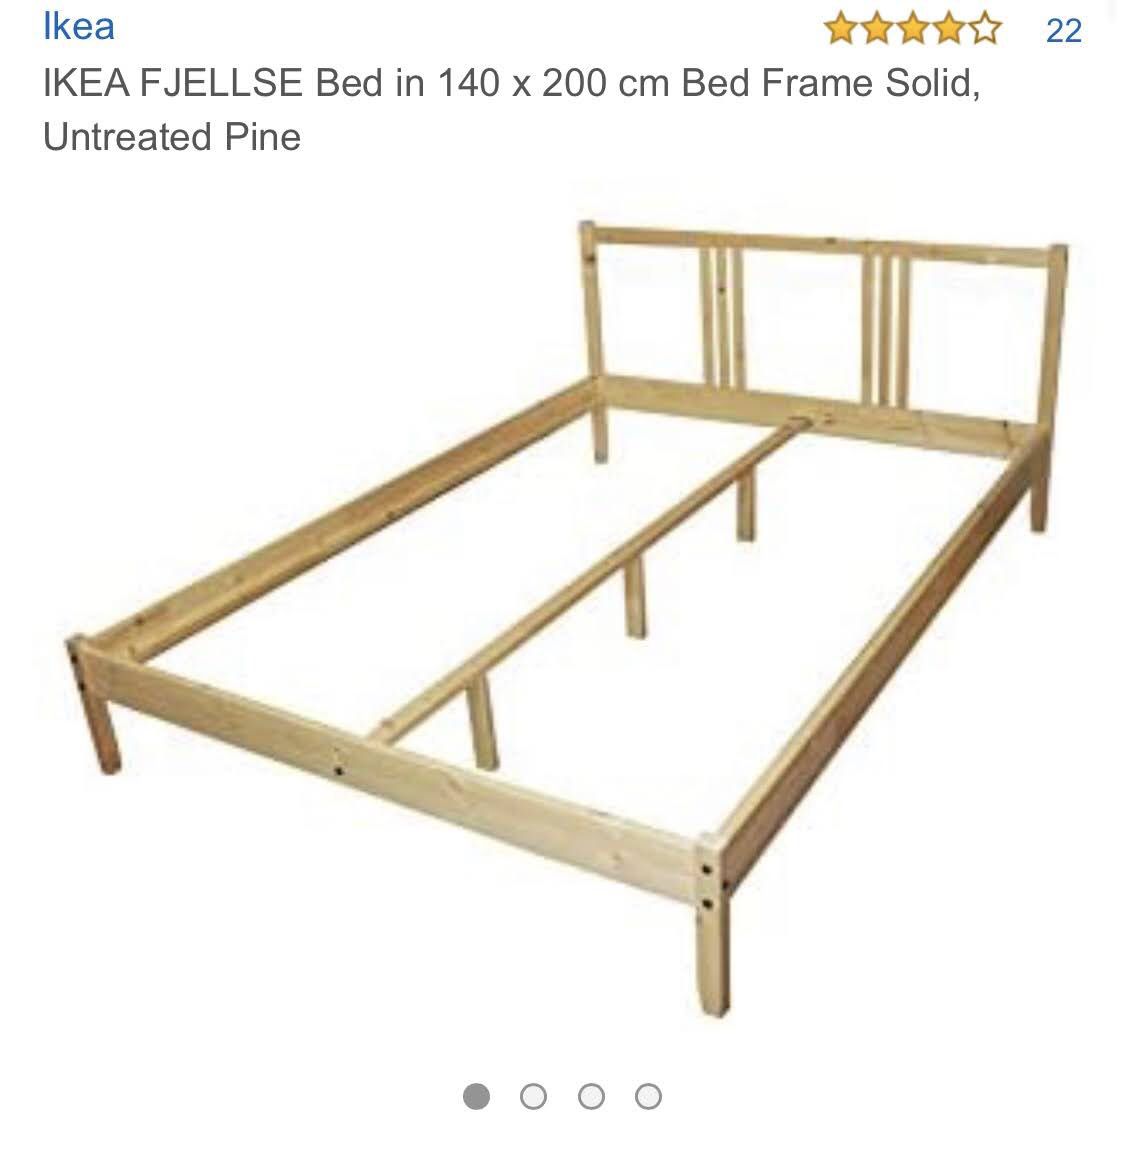 IKEA Full Bed - Frame and Mattress - Used